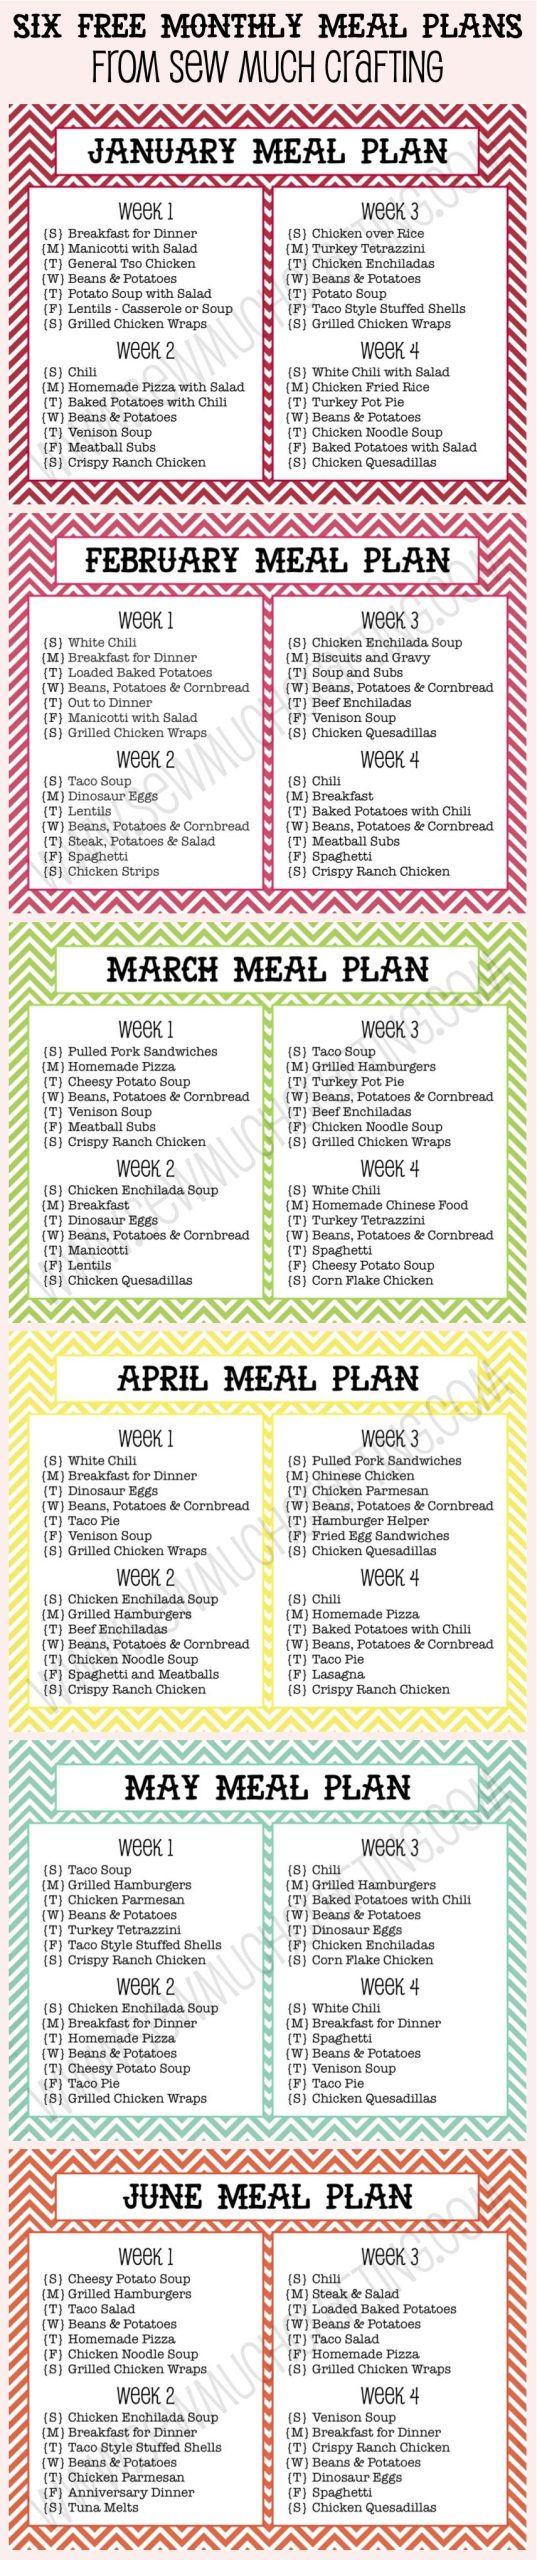 Meal Planning For 6 On A Budget